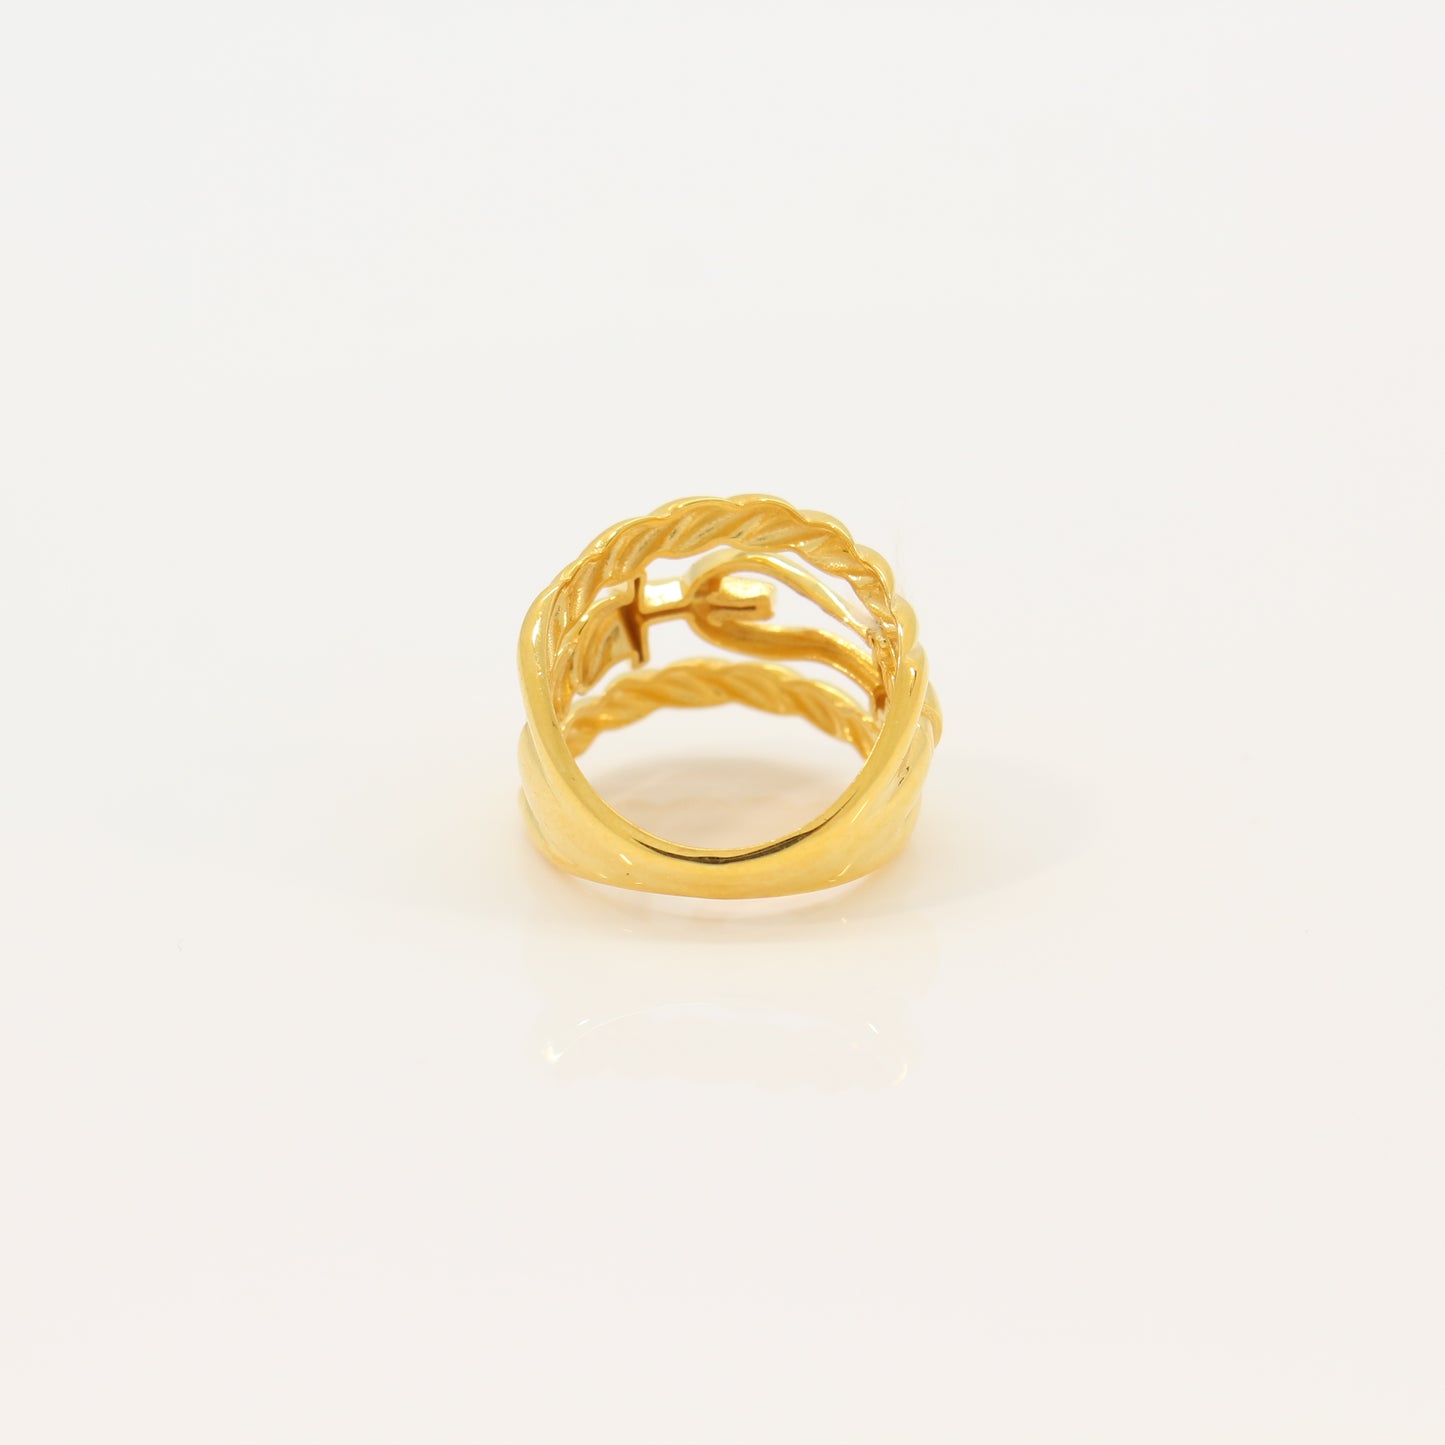 21K Gold Stacked Ring (size 6)